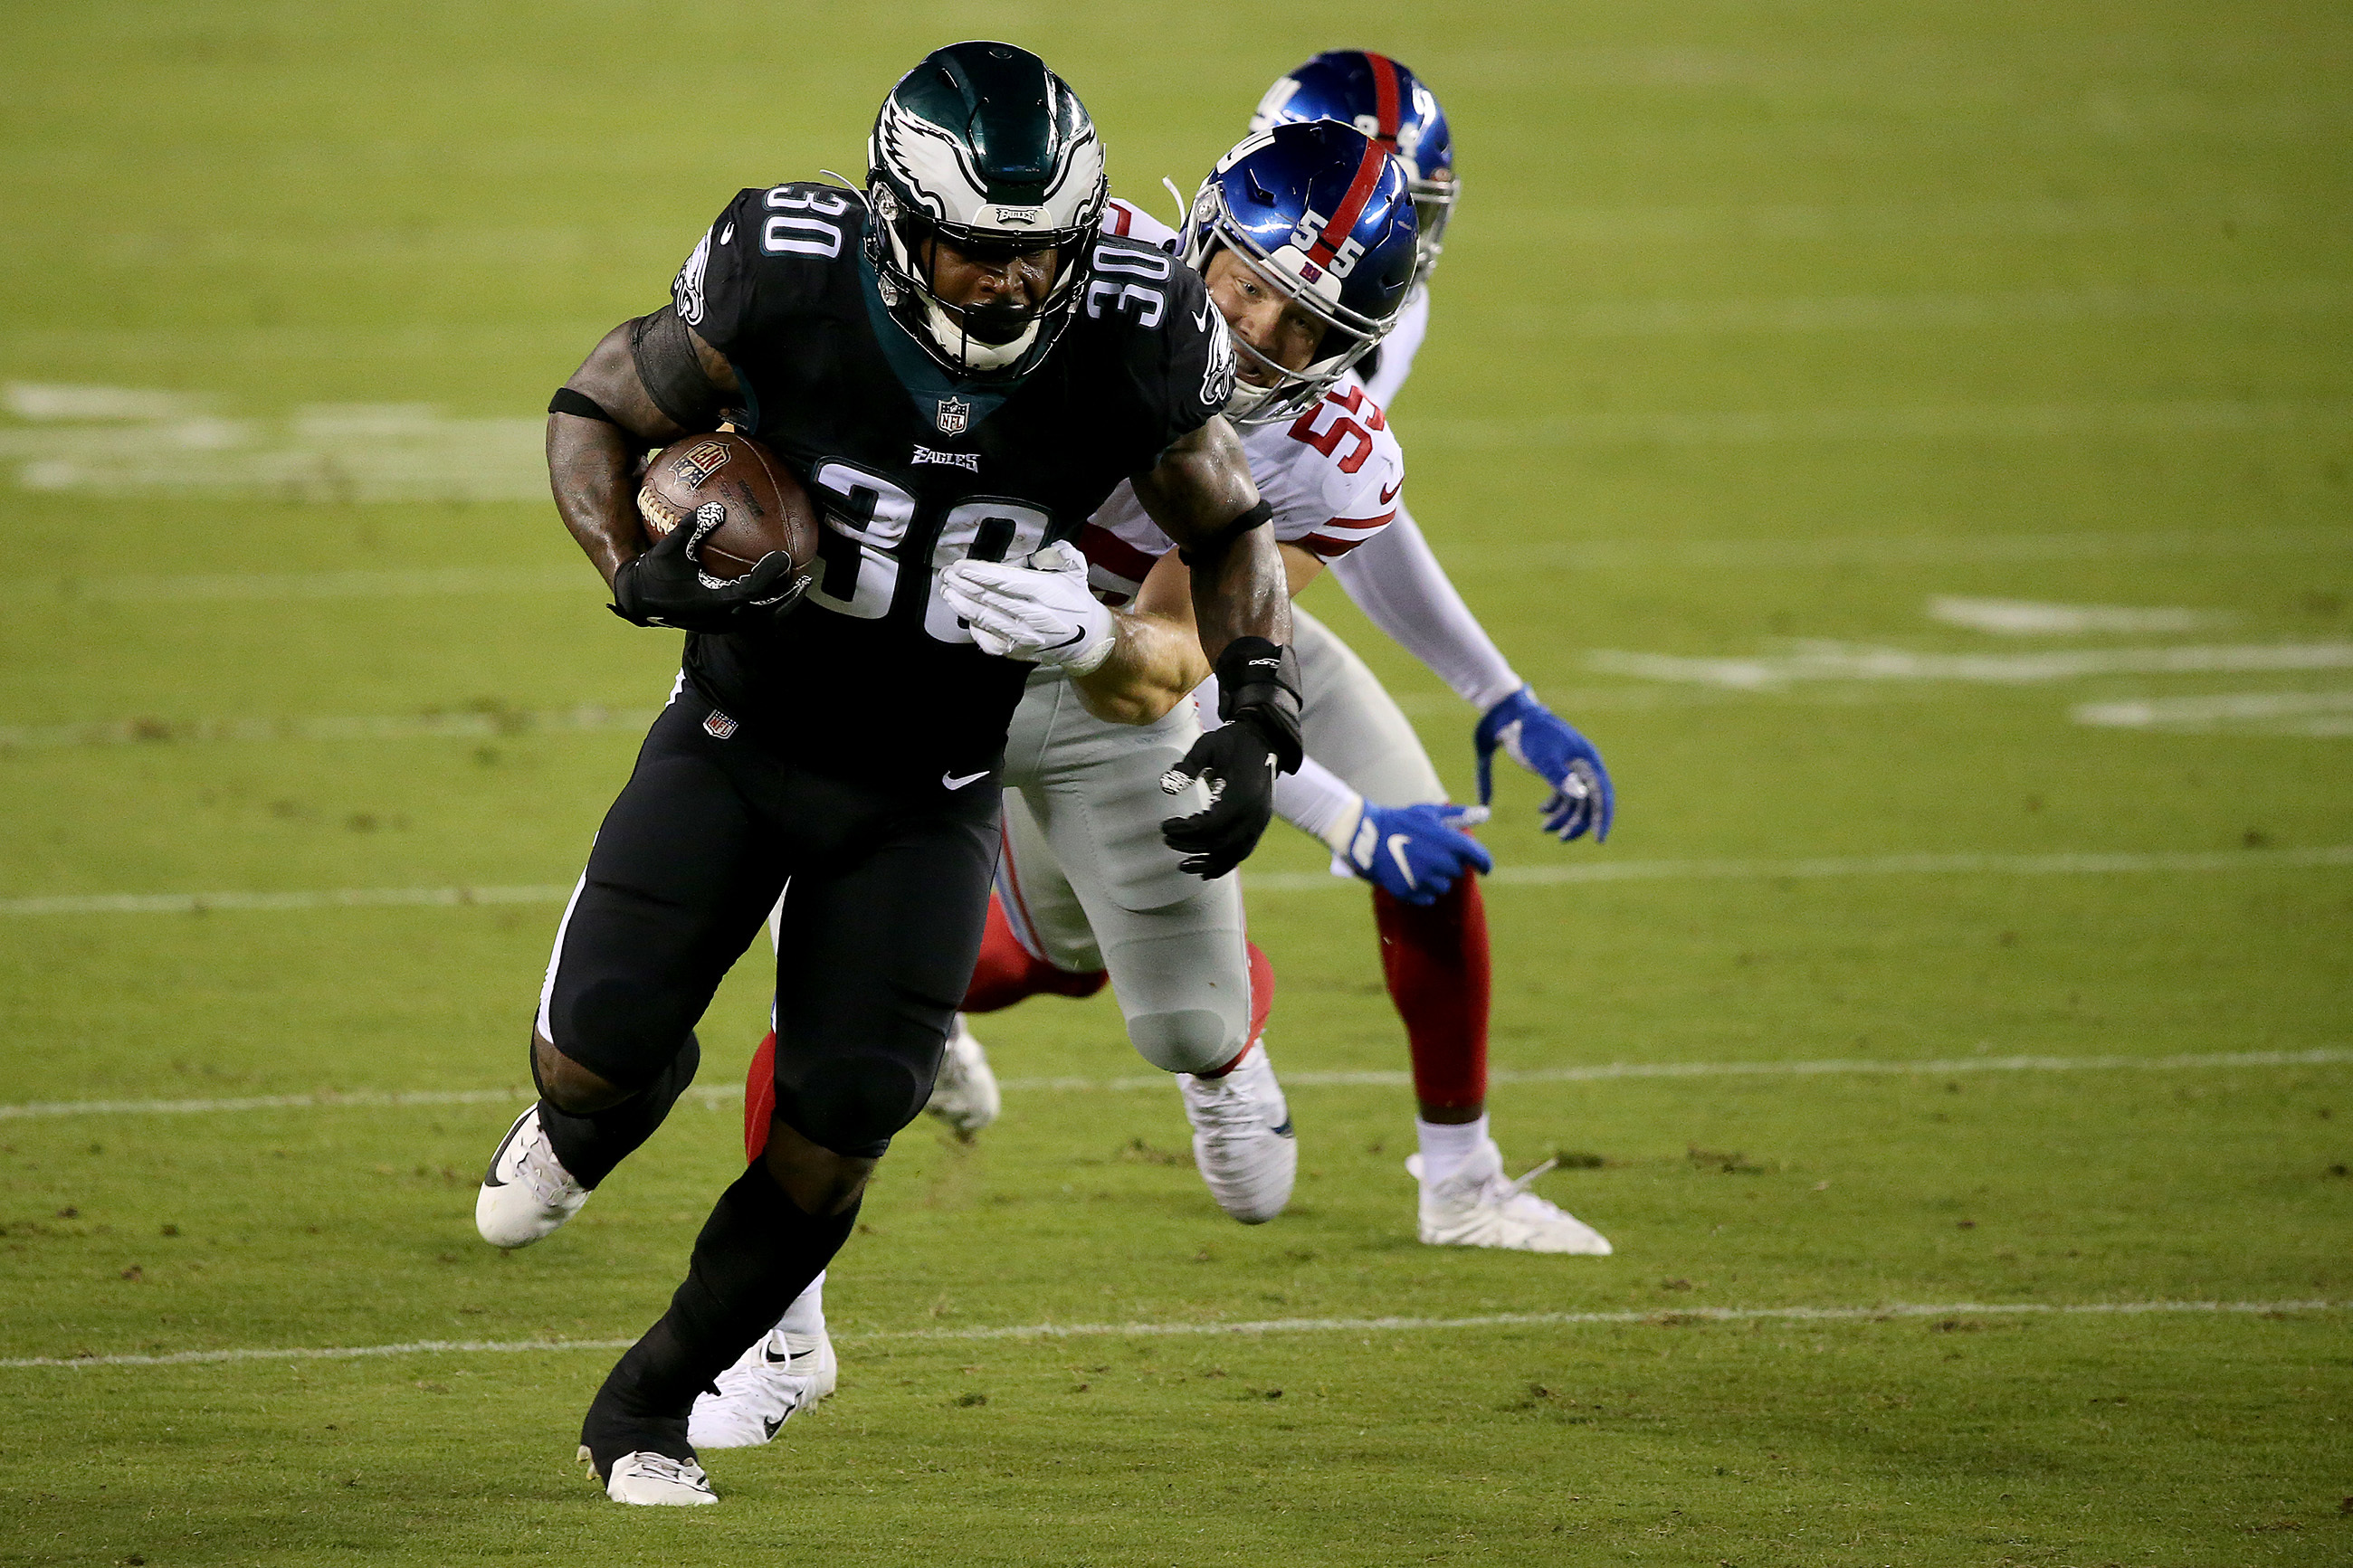 Giants send the Eagles out 42-7 losers - NBC Sports